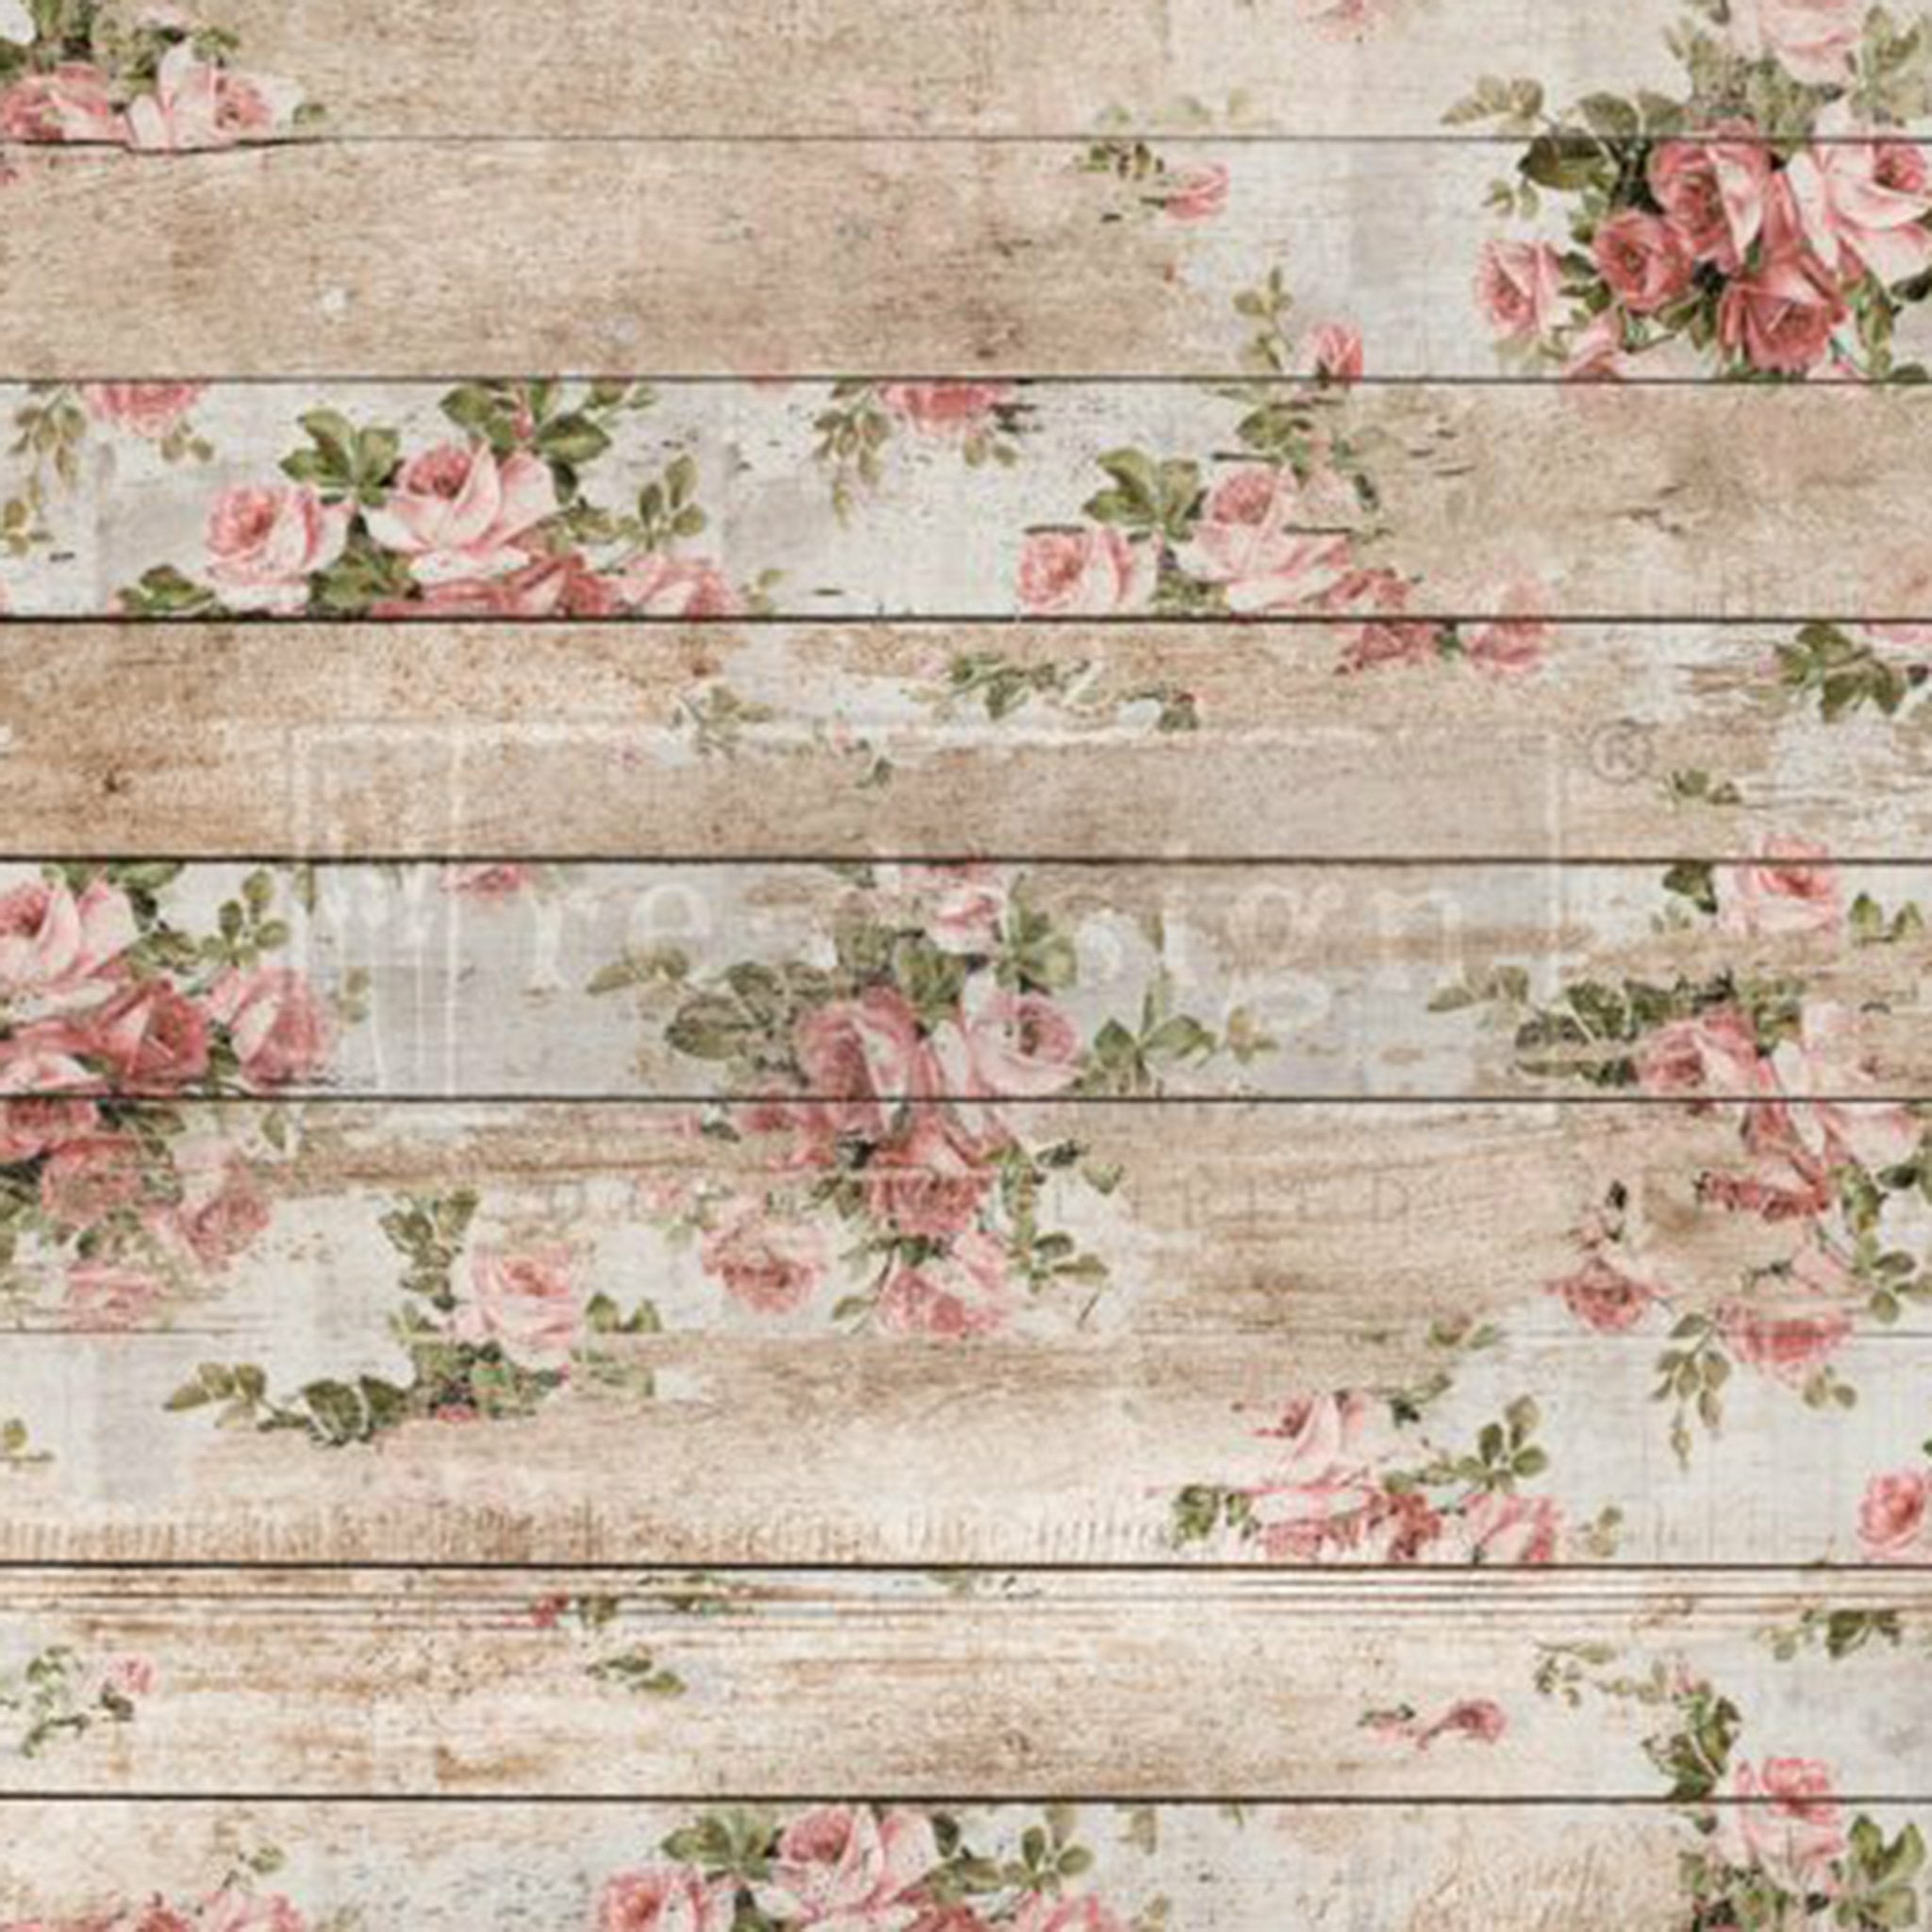 Small clusters of light pink/coral roses on a weathered boarded background. Very shabby chic.